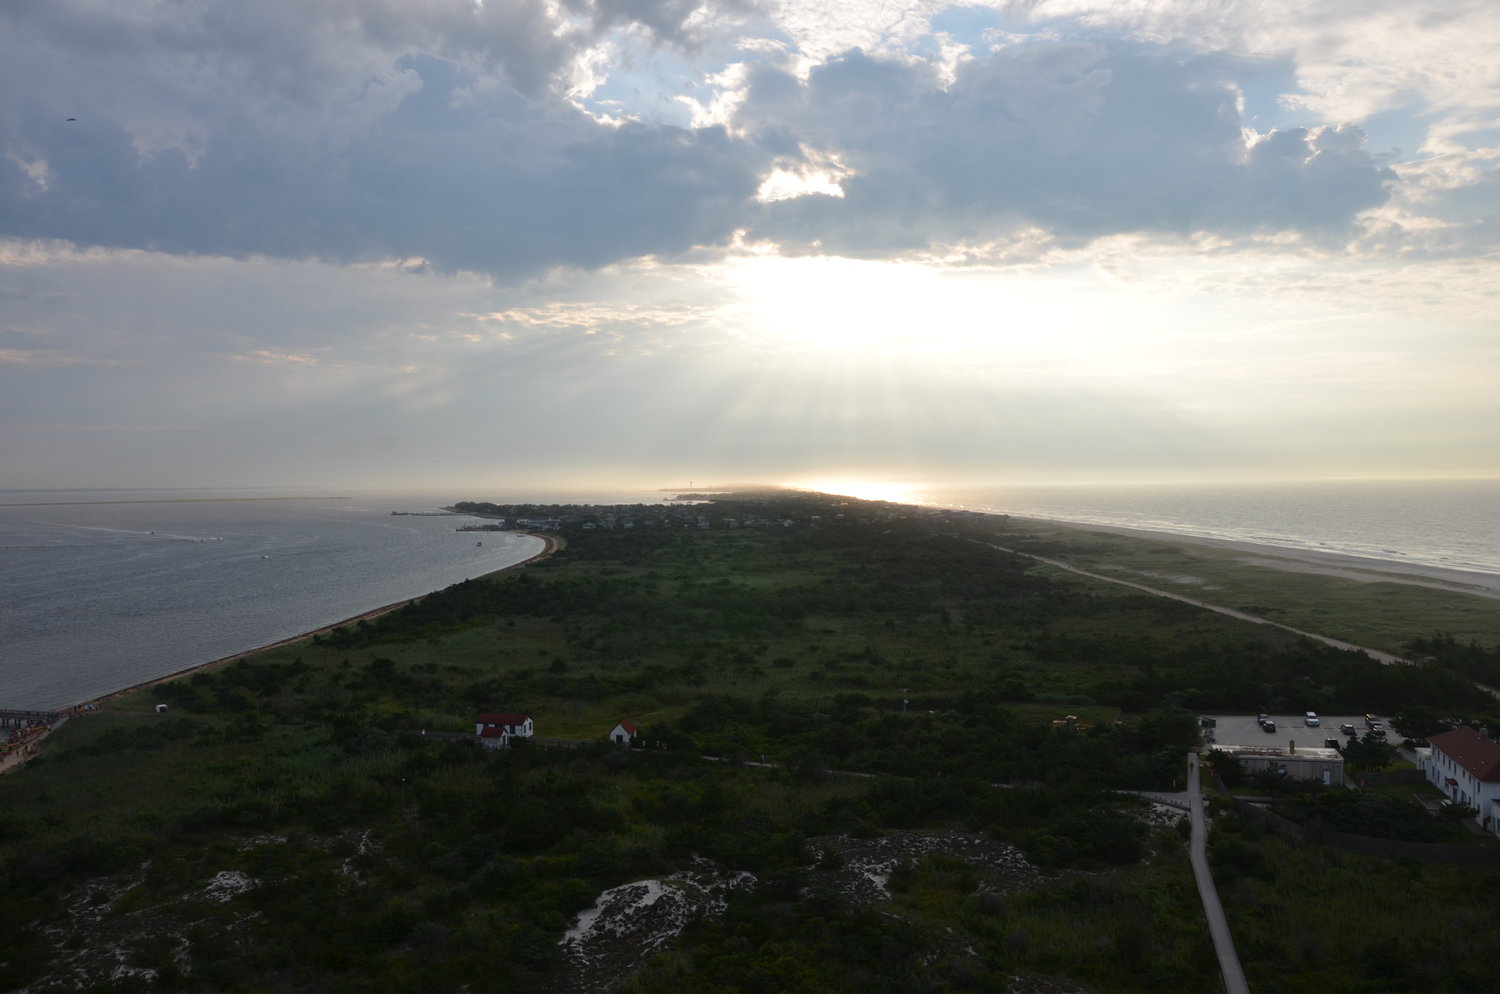 The spectacular views from the top of the lighthouse.